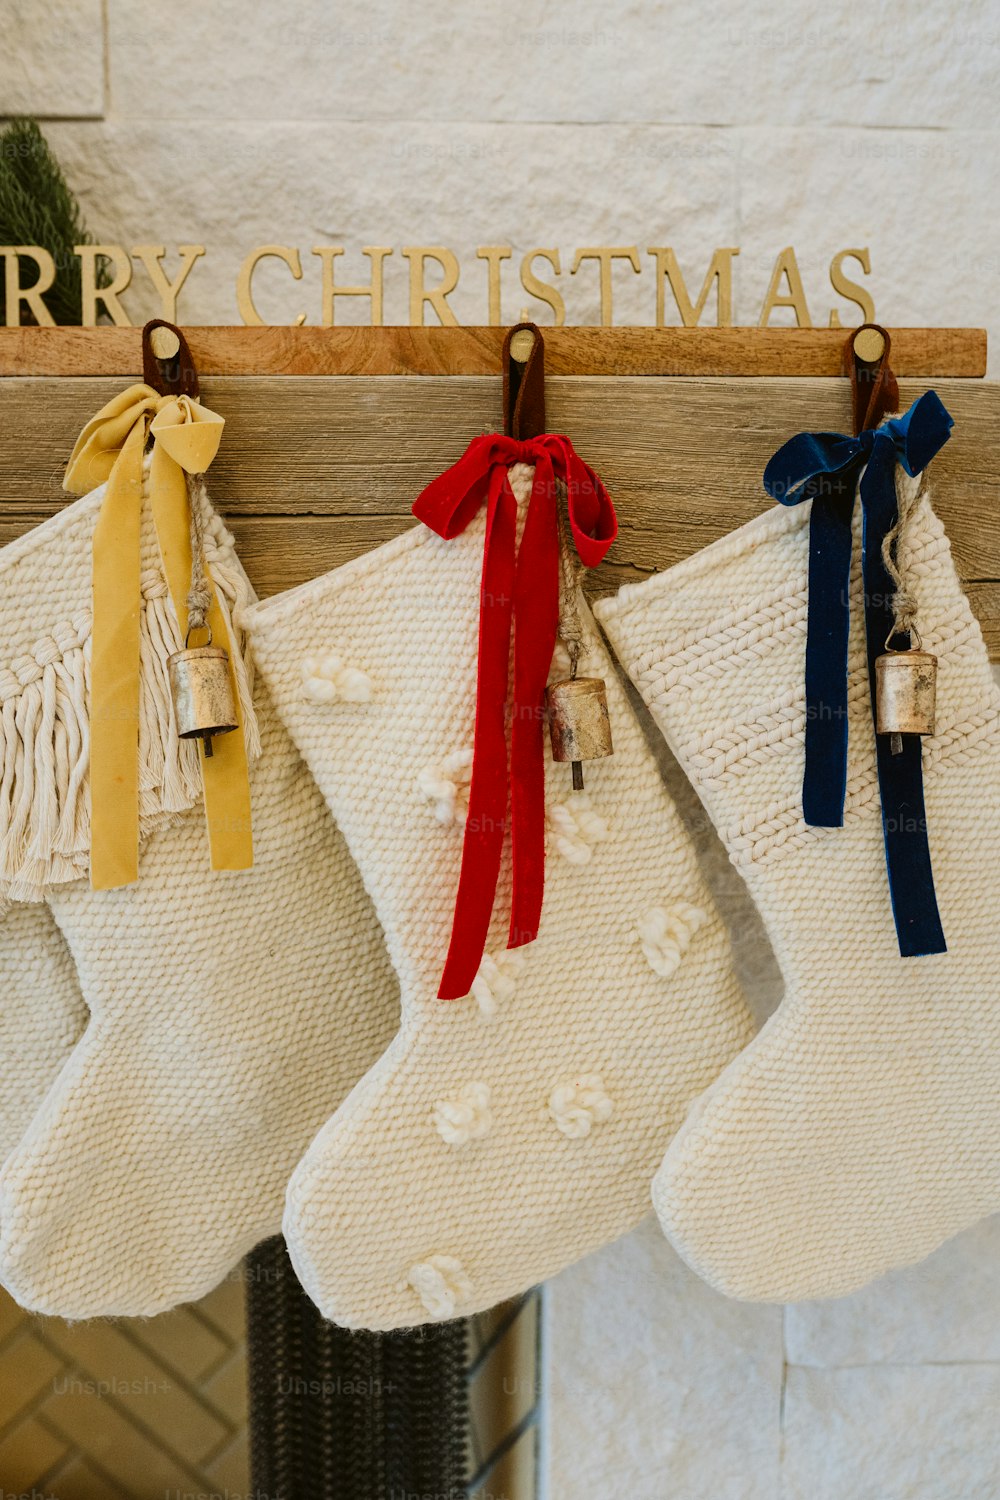 three stockings hanging from a fireplace with a merry christmas sign above them